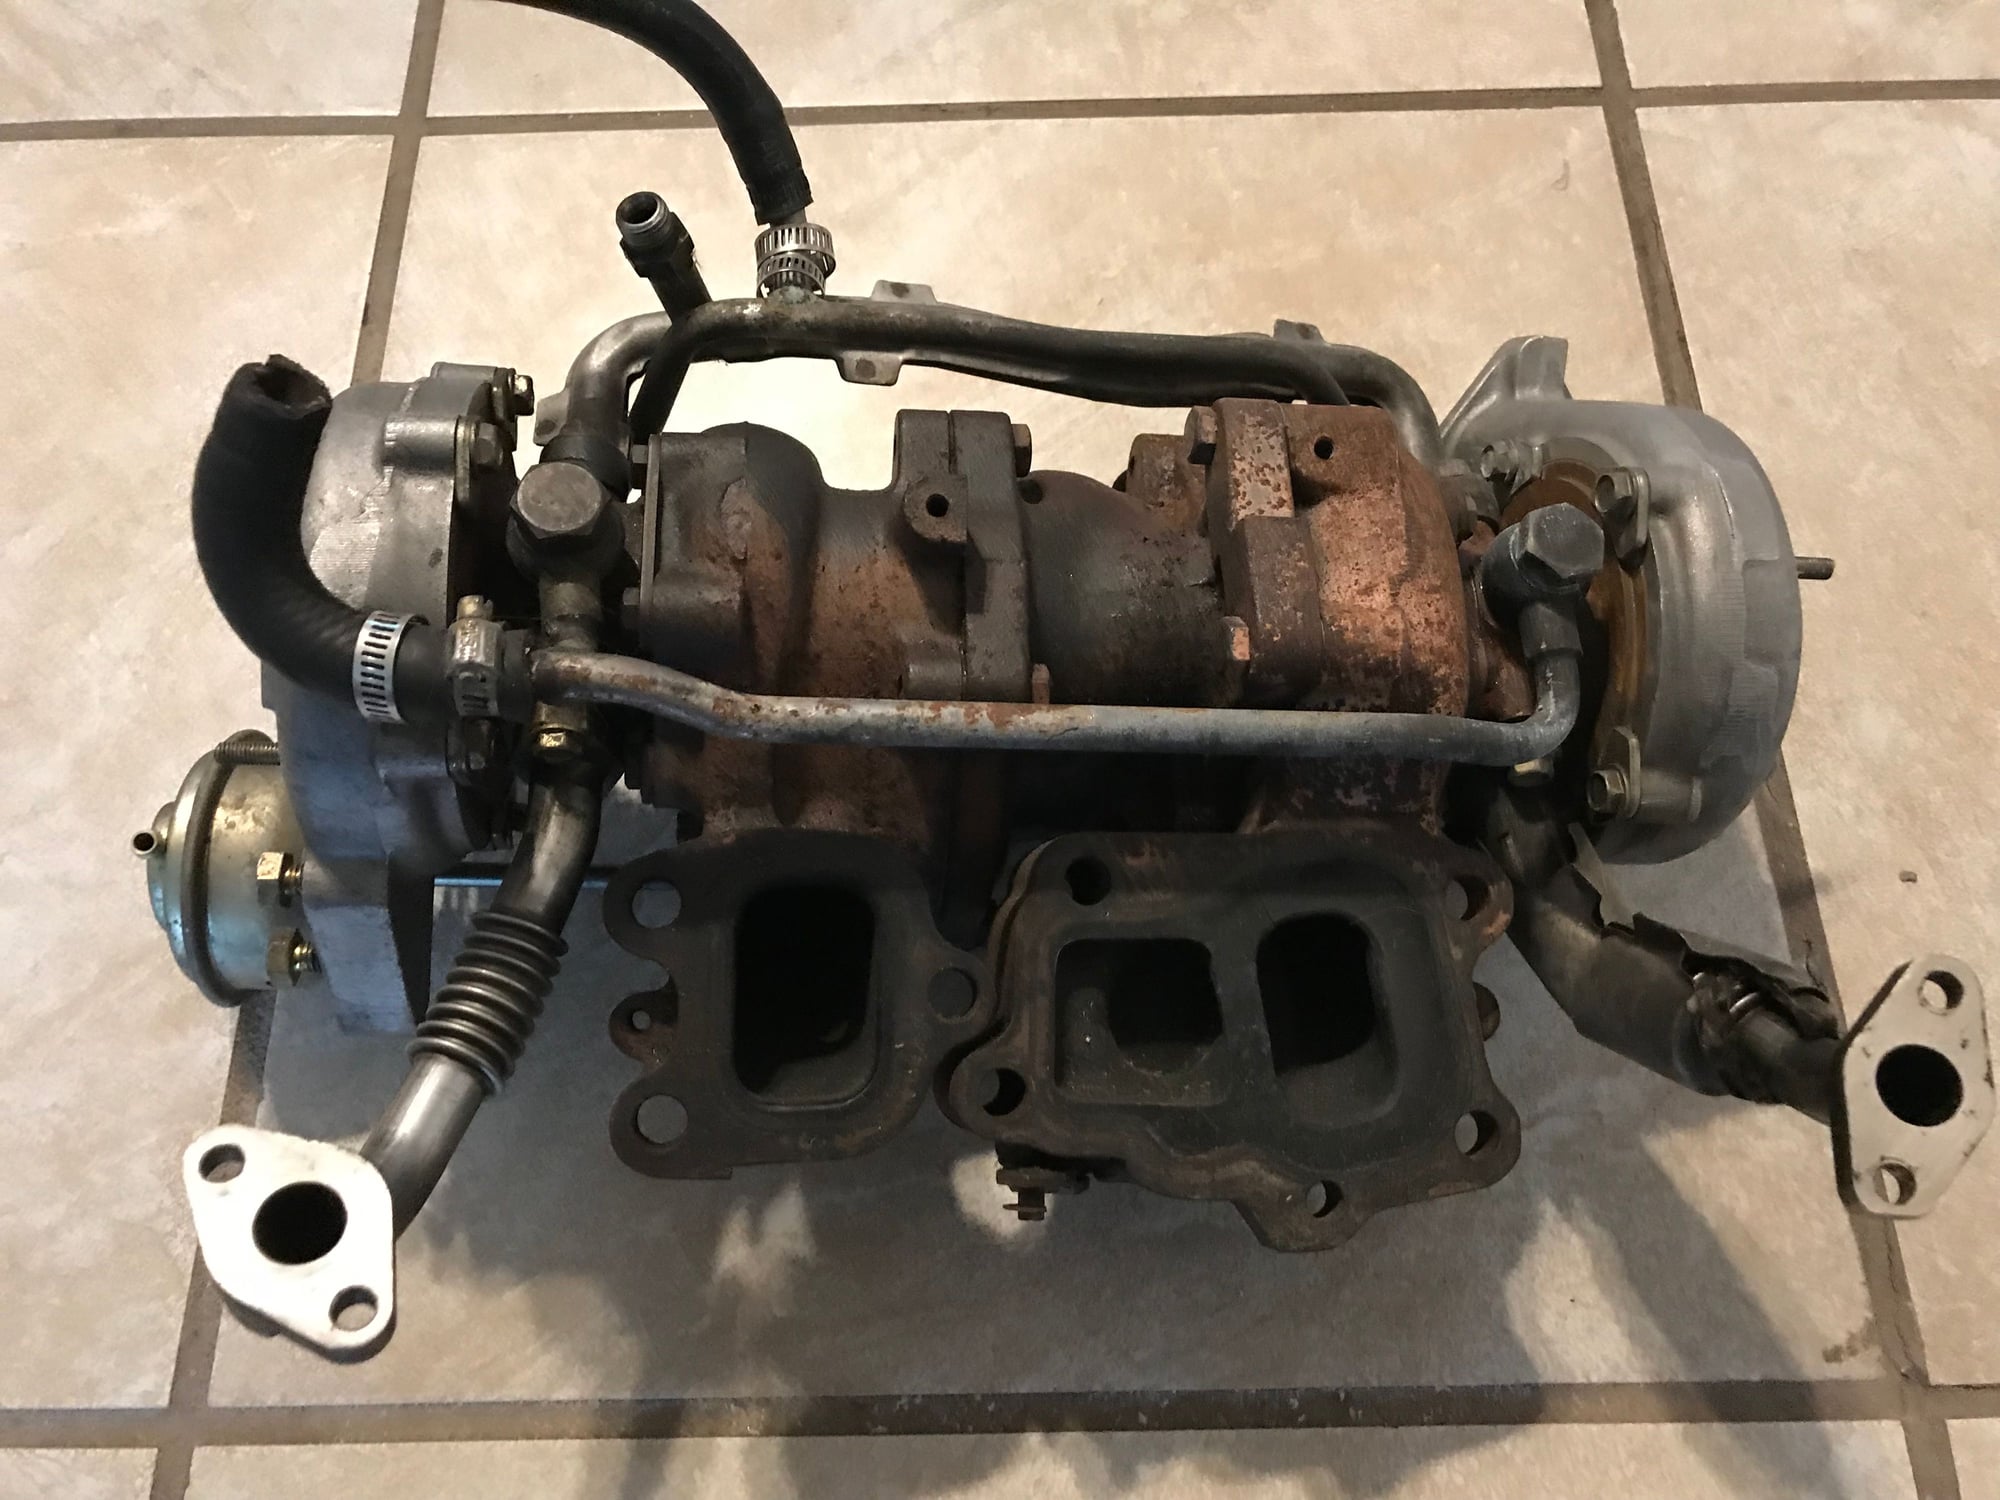 Engine - Power Adders - 99 OEM Twin Turbos - Used - 1992 to 2003 Mazda RX-7 - Scituate, RI 02857, United States